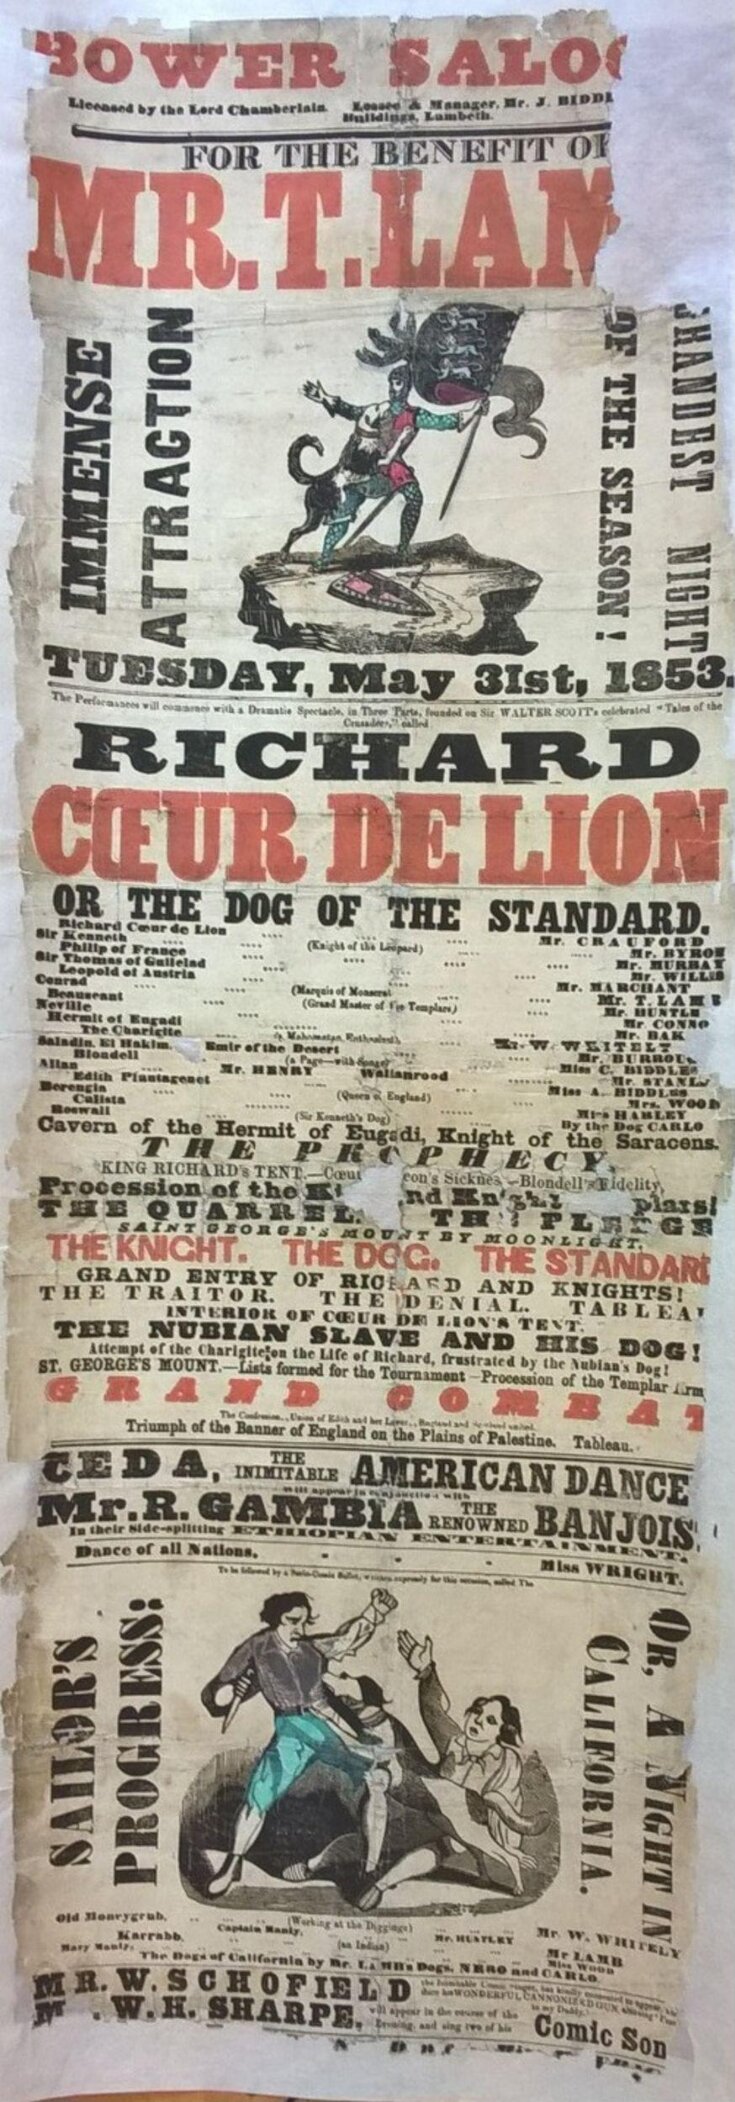 Illustrated playbill advertising the programme at the Bower Saloon, 31 May 1853 top image